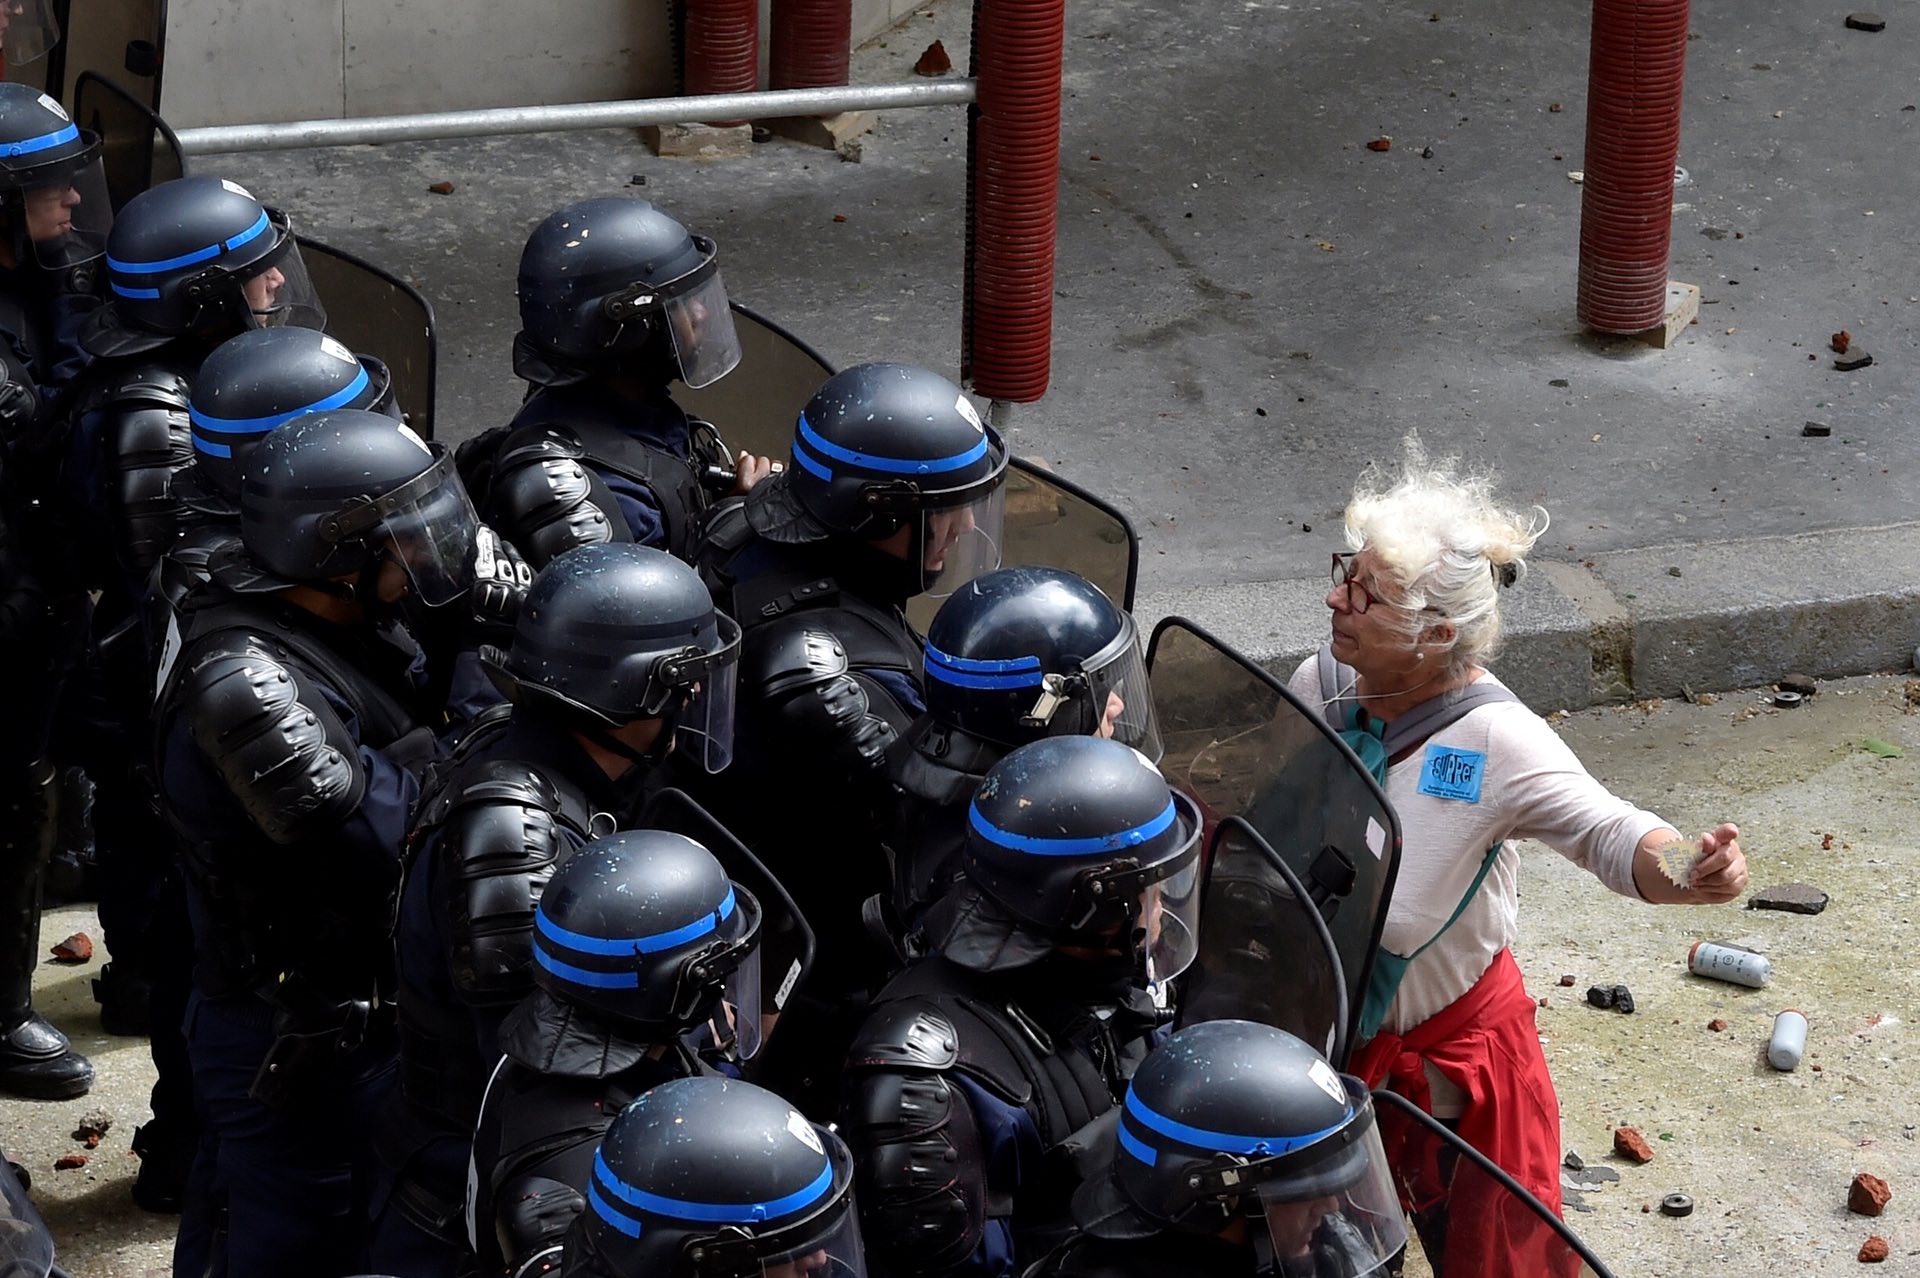 A woman stands in front of police officers as they block access to a street during a protest against proposed labour reforms in Paris on 14 June 2016. PHOTO: AFP